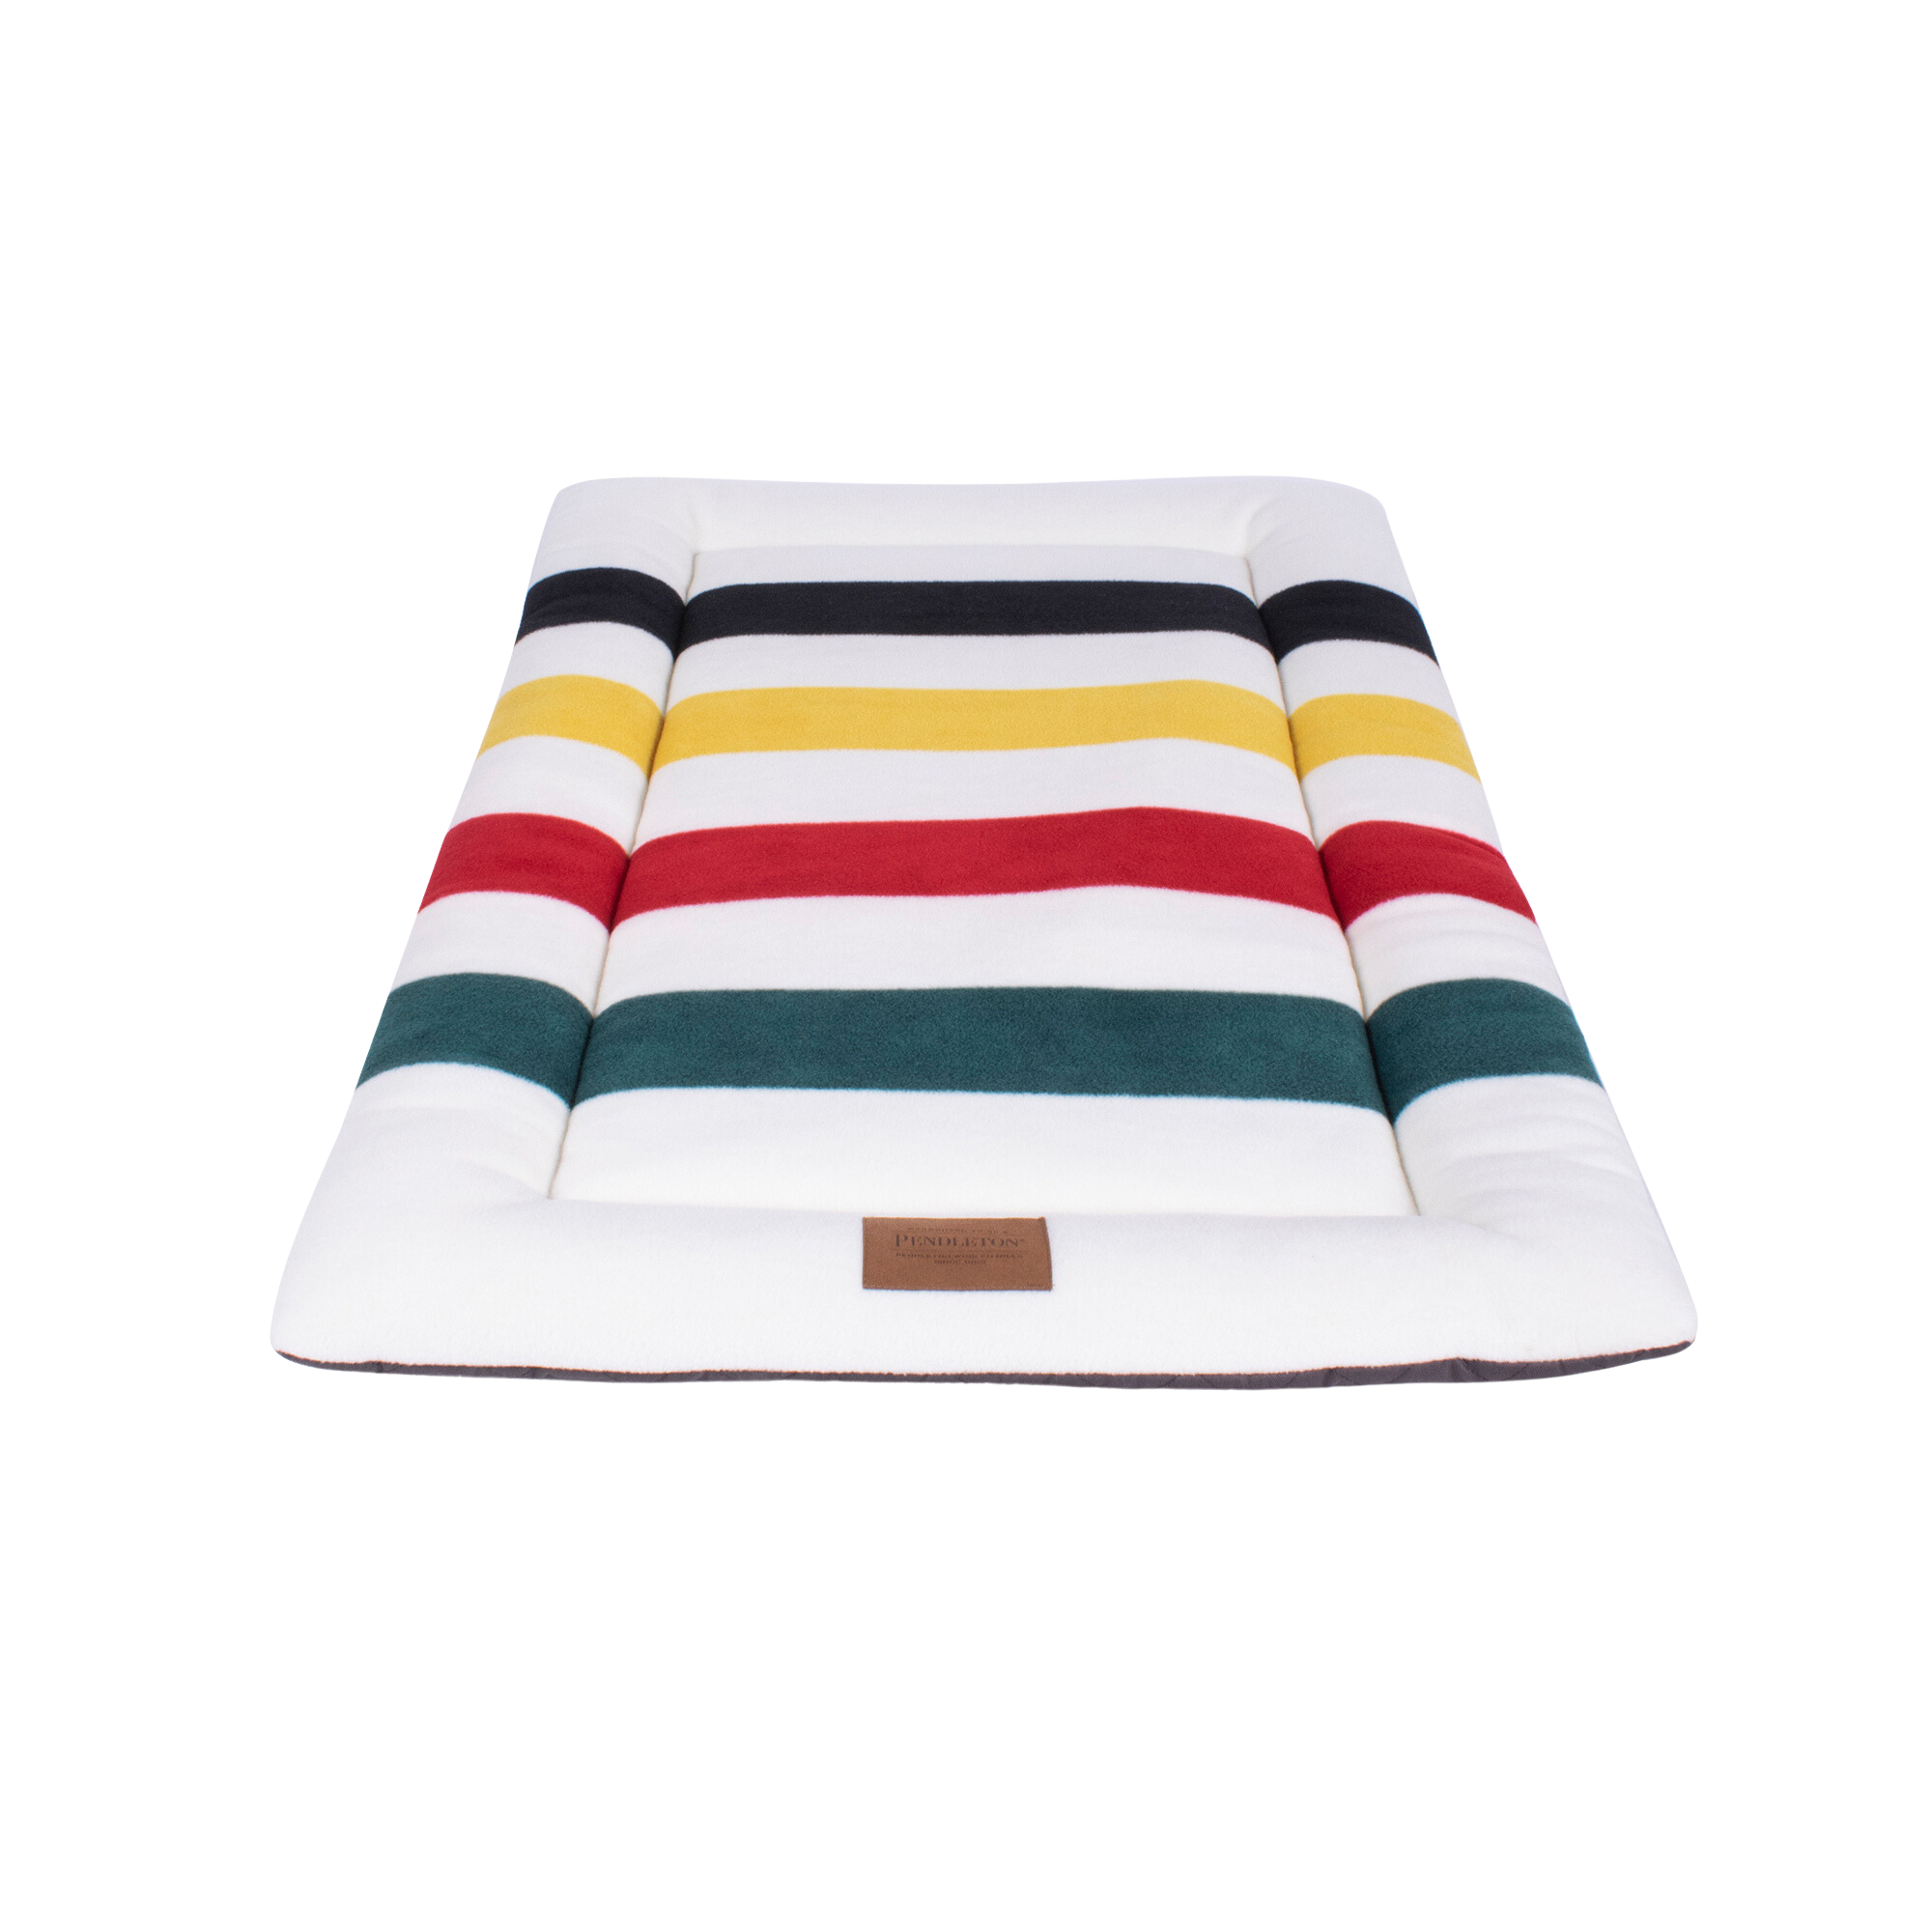 PENDLETON-DOG-COMFORT-CUSHION-DOG-KENNEL-MAT-CRATE-WHITE-RED-GREEN-YELLOW-GLACIER-NATIONAL-PARK